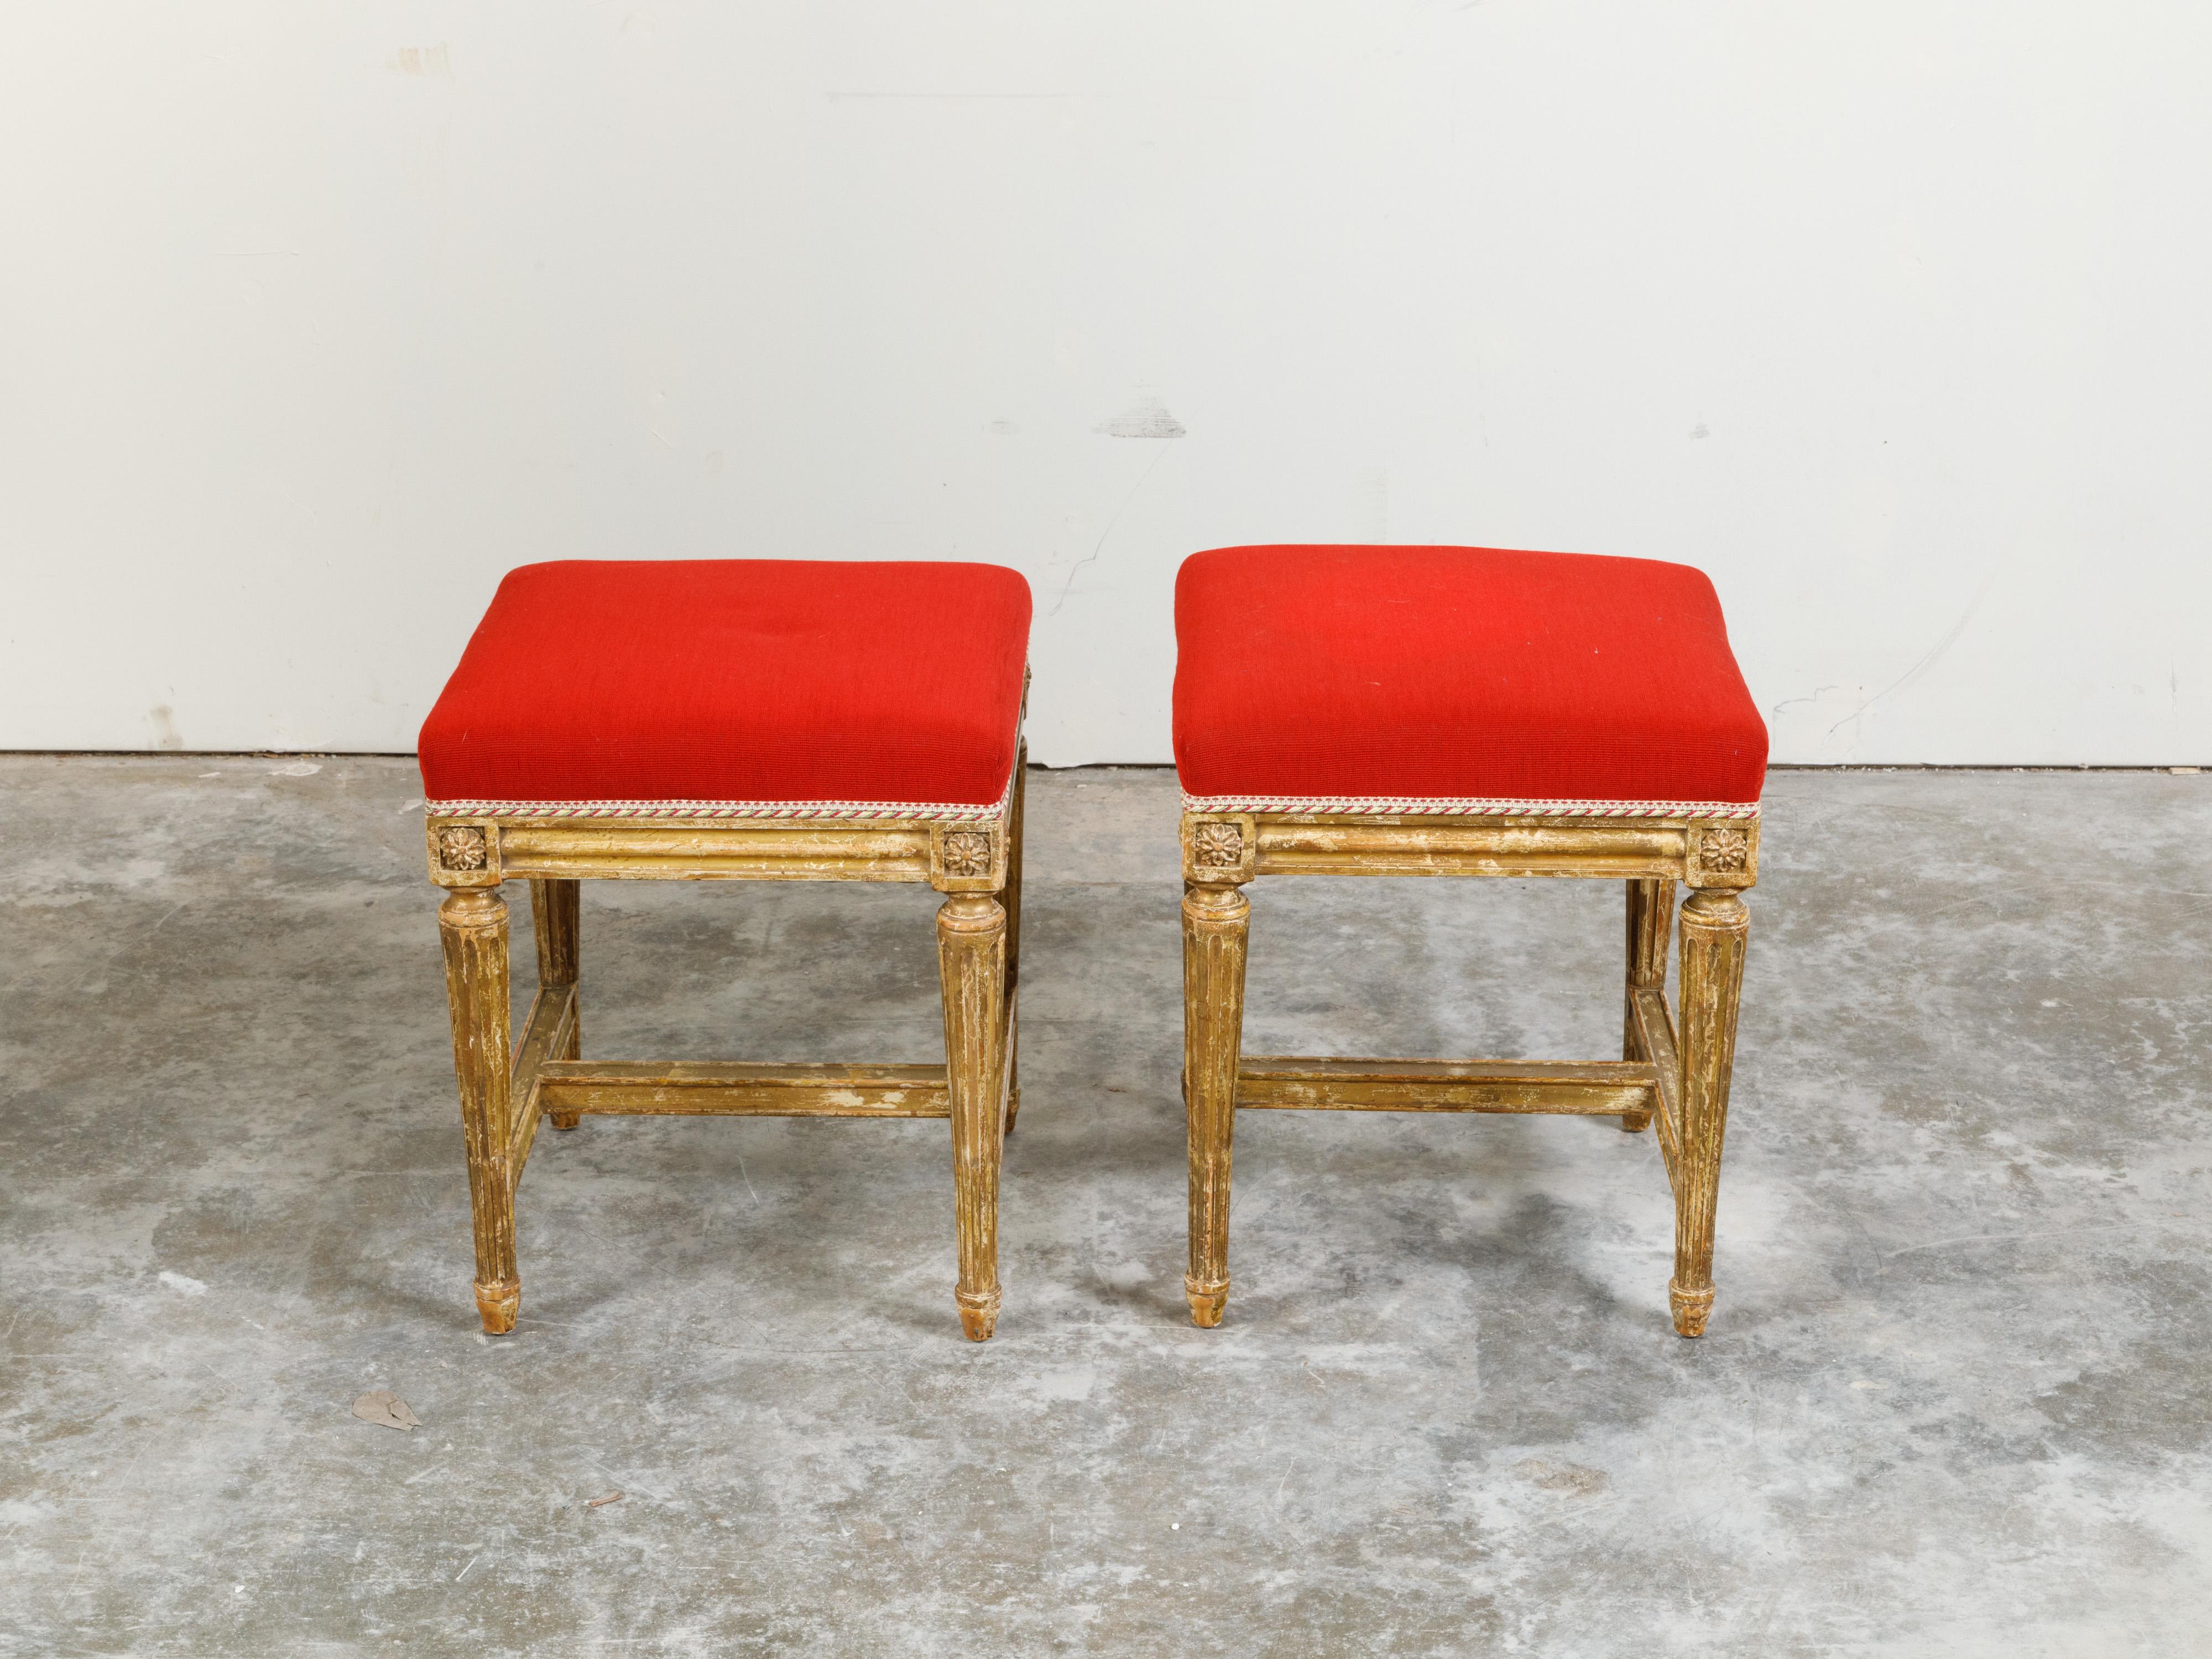 Pair of Neoclassical Style 19th Century Painted Stools with Red Upholstery In Good Condition For Sale In Atlanta, GA